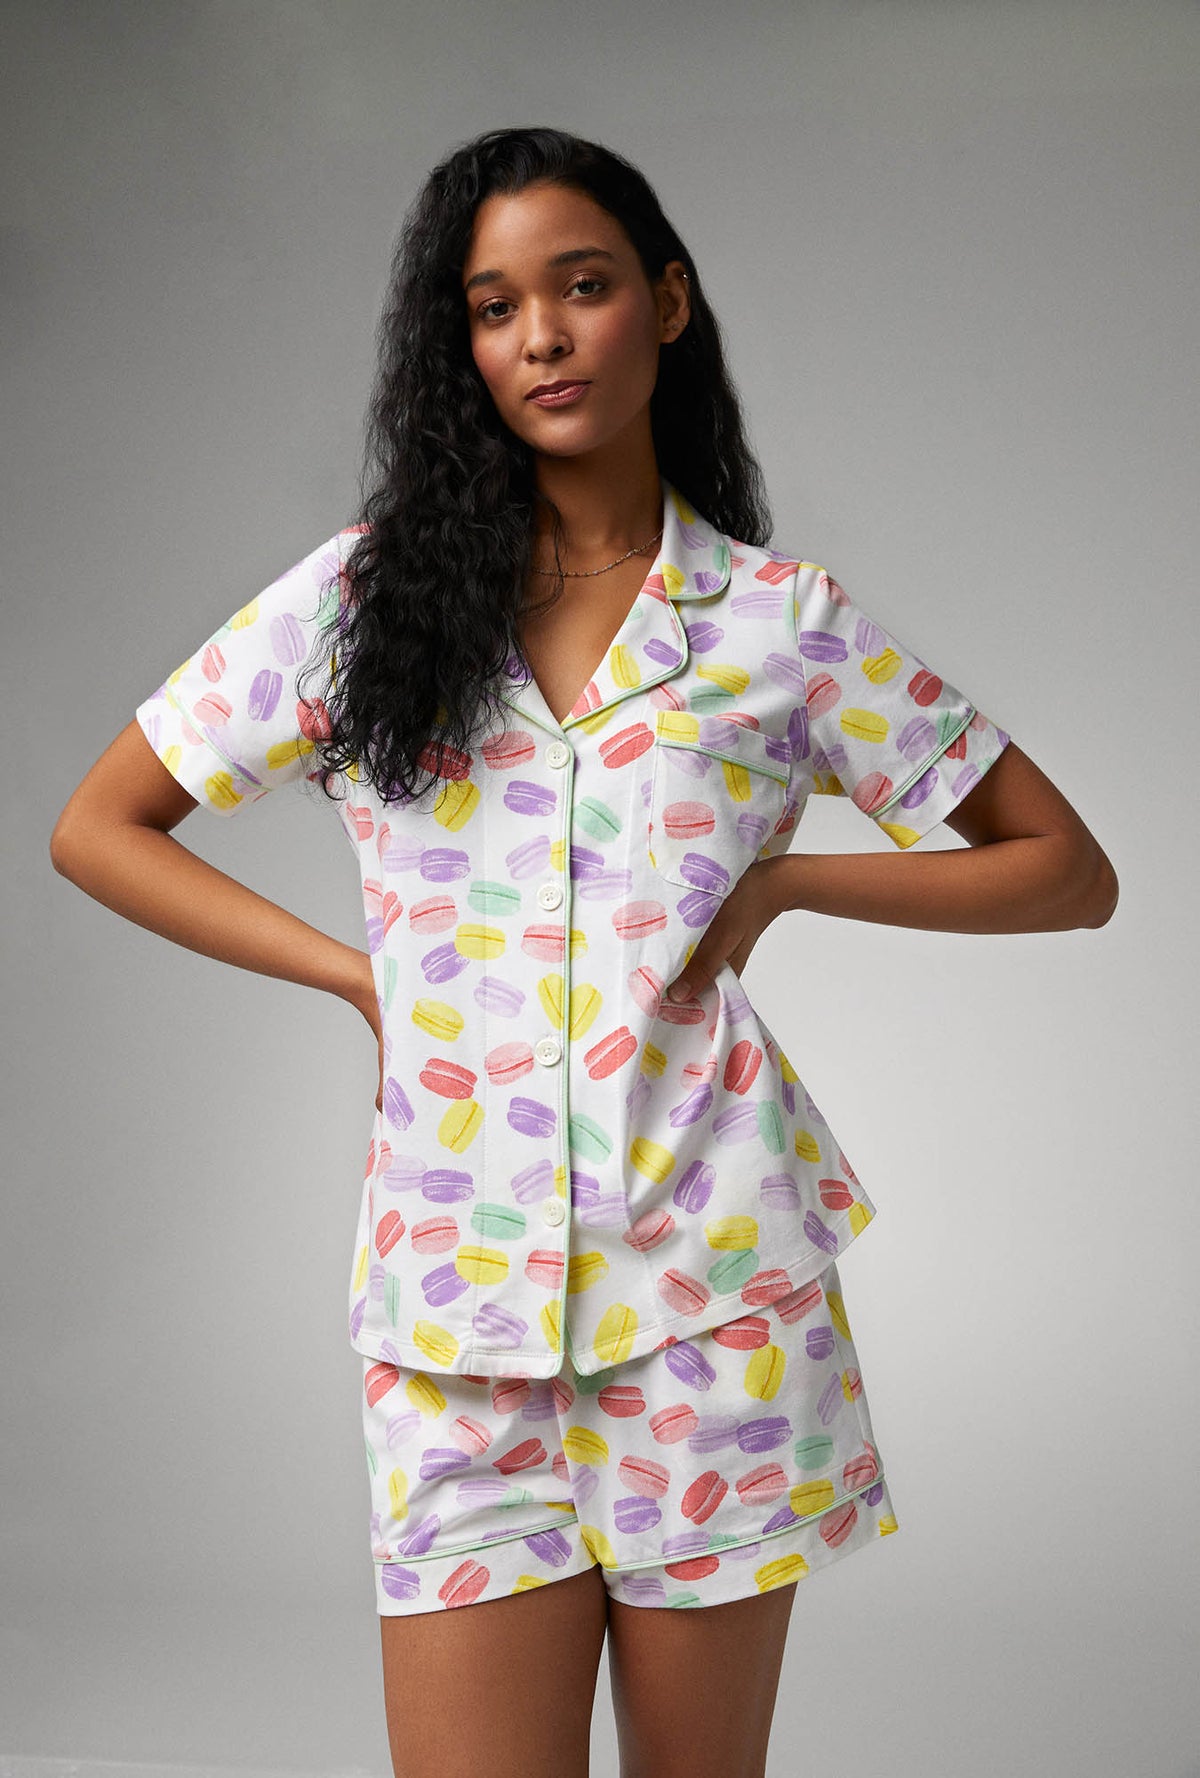 A lady wearing white Short Sleeve Classic Shorty Stretch Jersey PJ Set with Delice De Macarons print